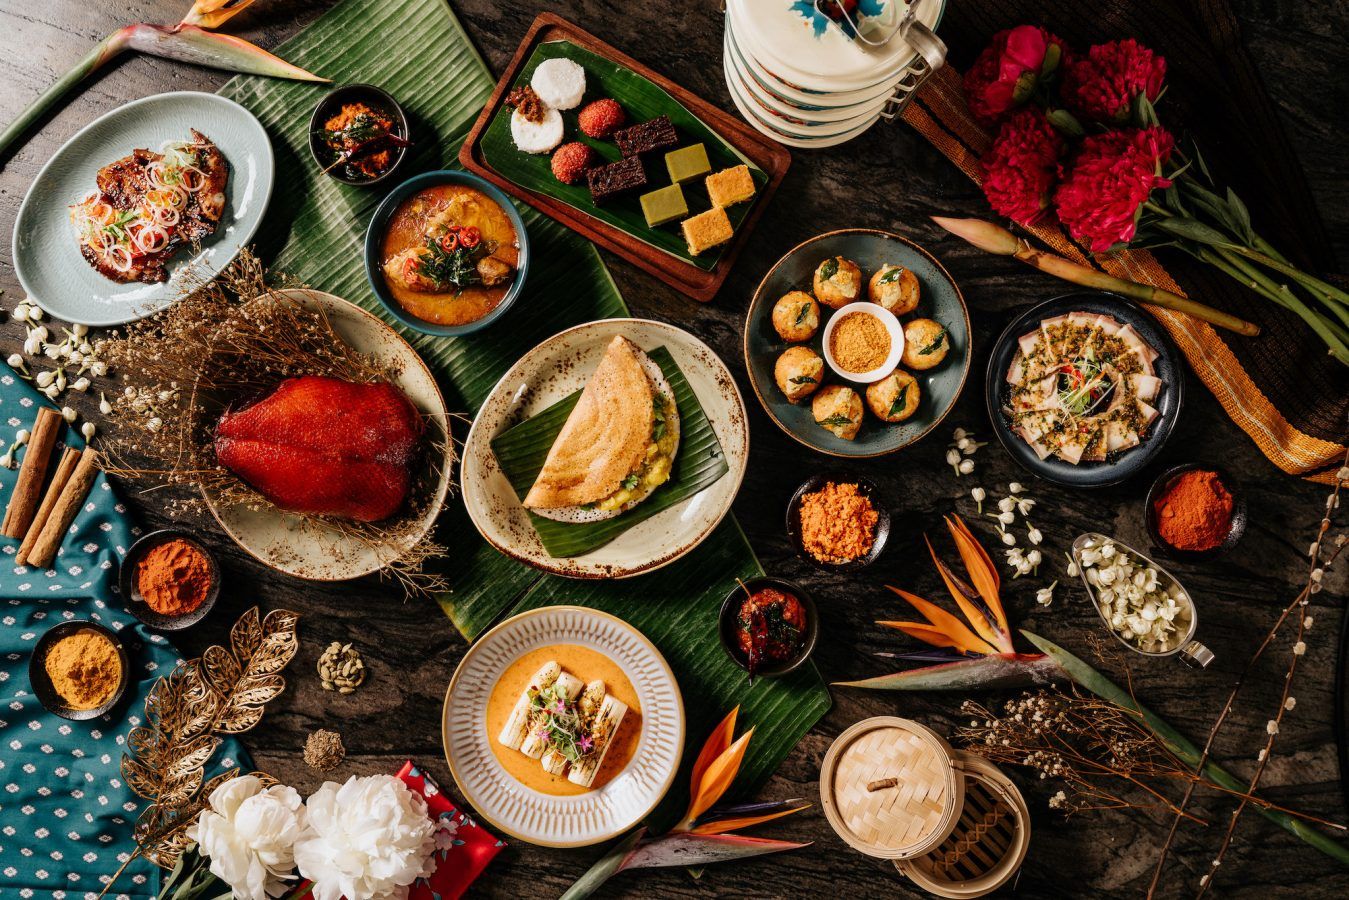 Restaurants in Singapore with National Day menus, from buffets to fine dining